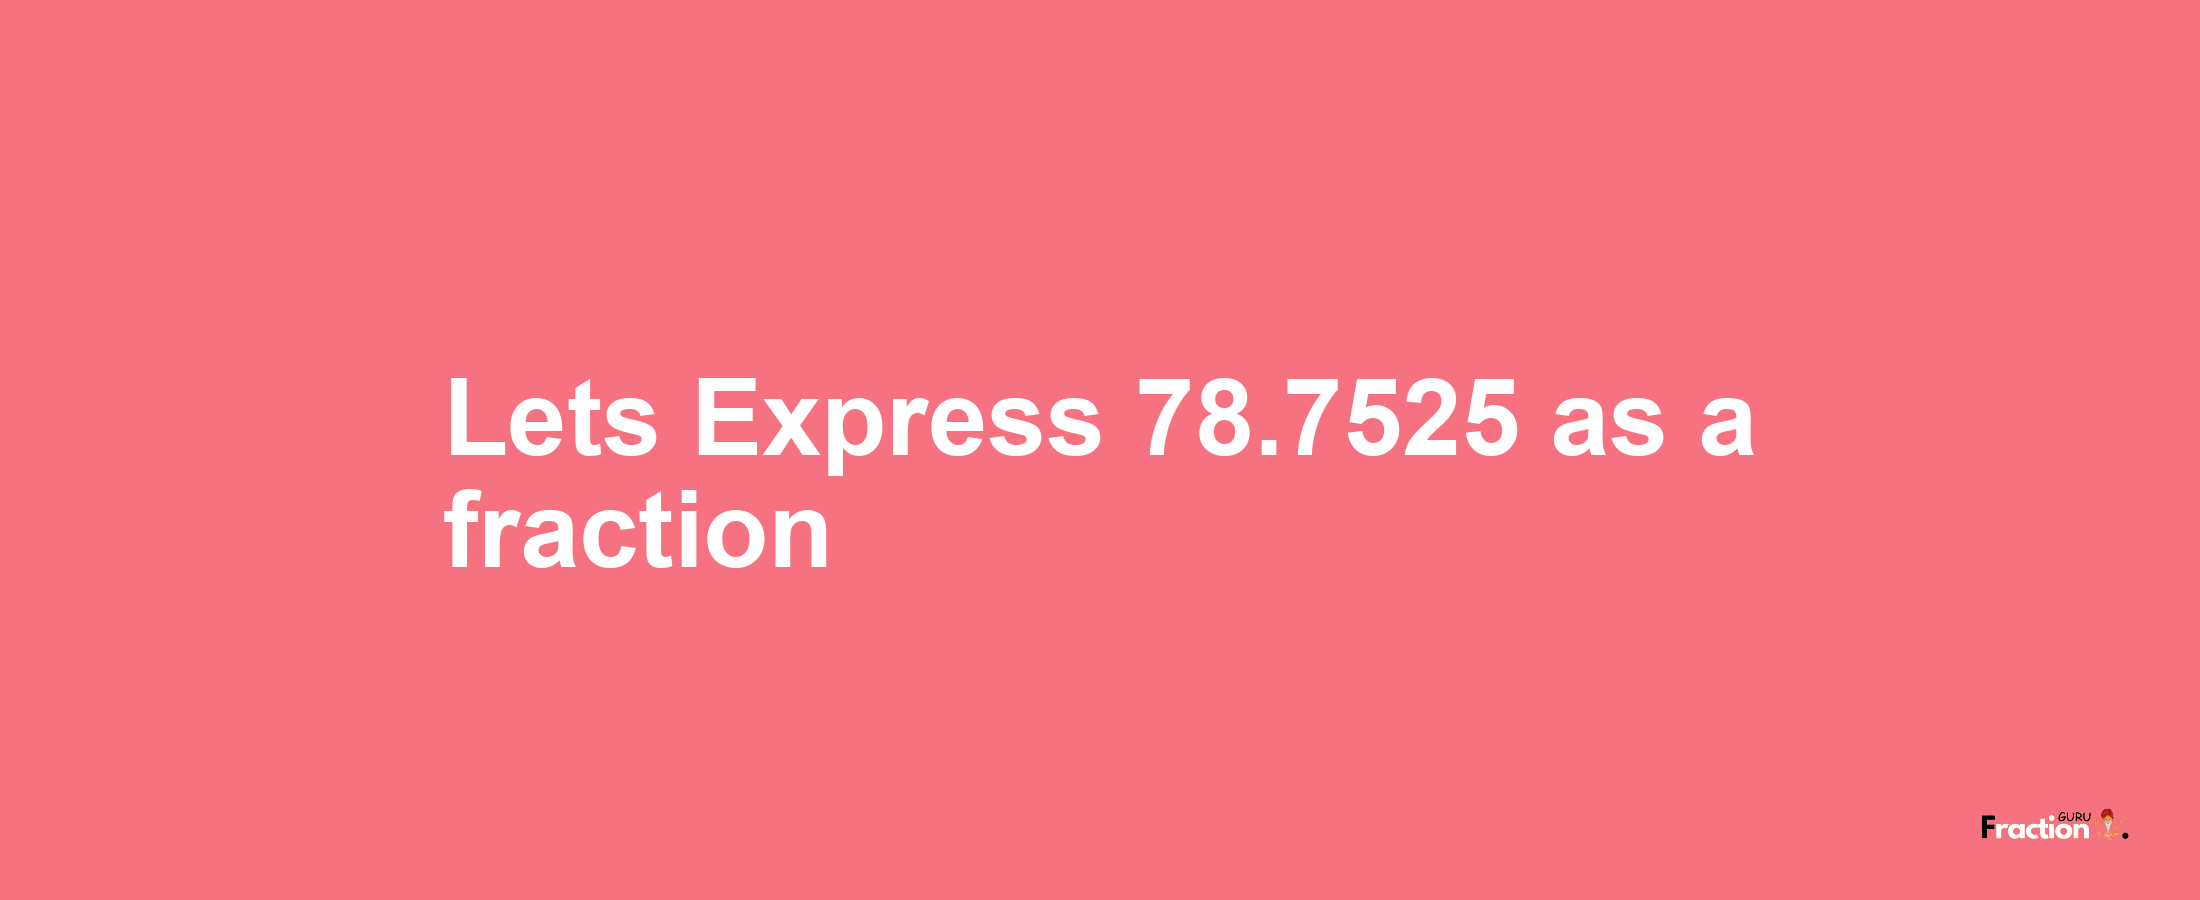 Lets Express 78.7525 as afraction